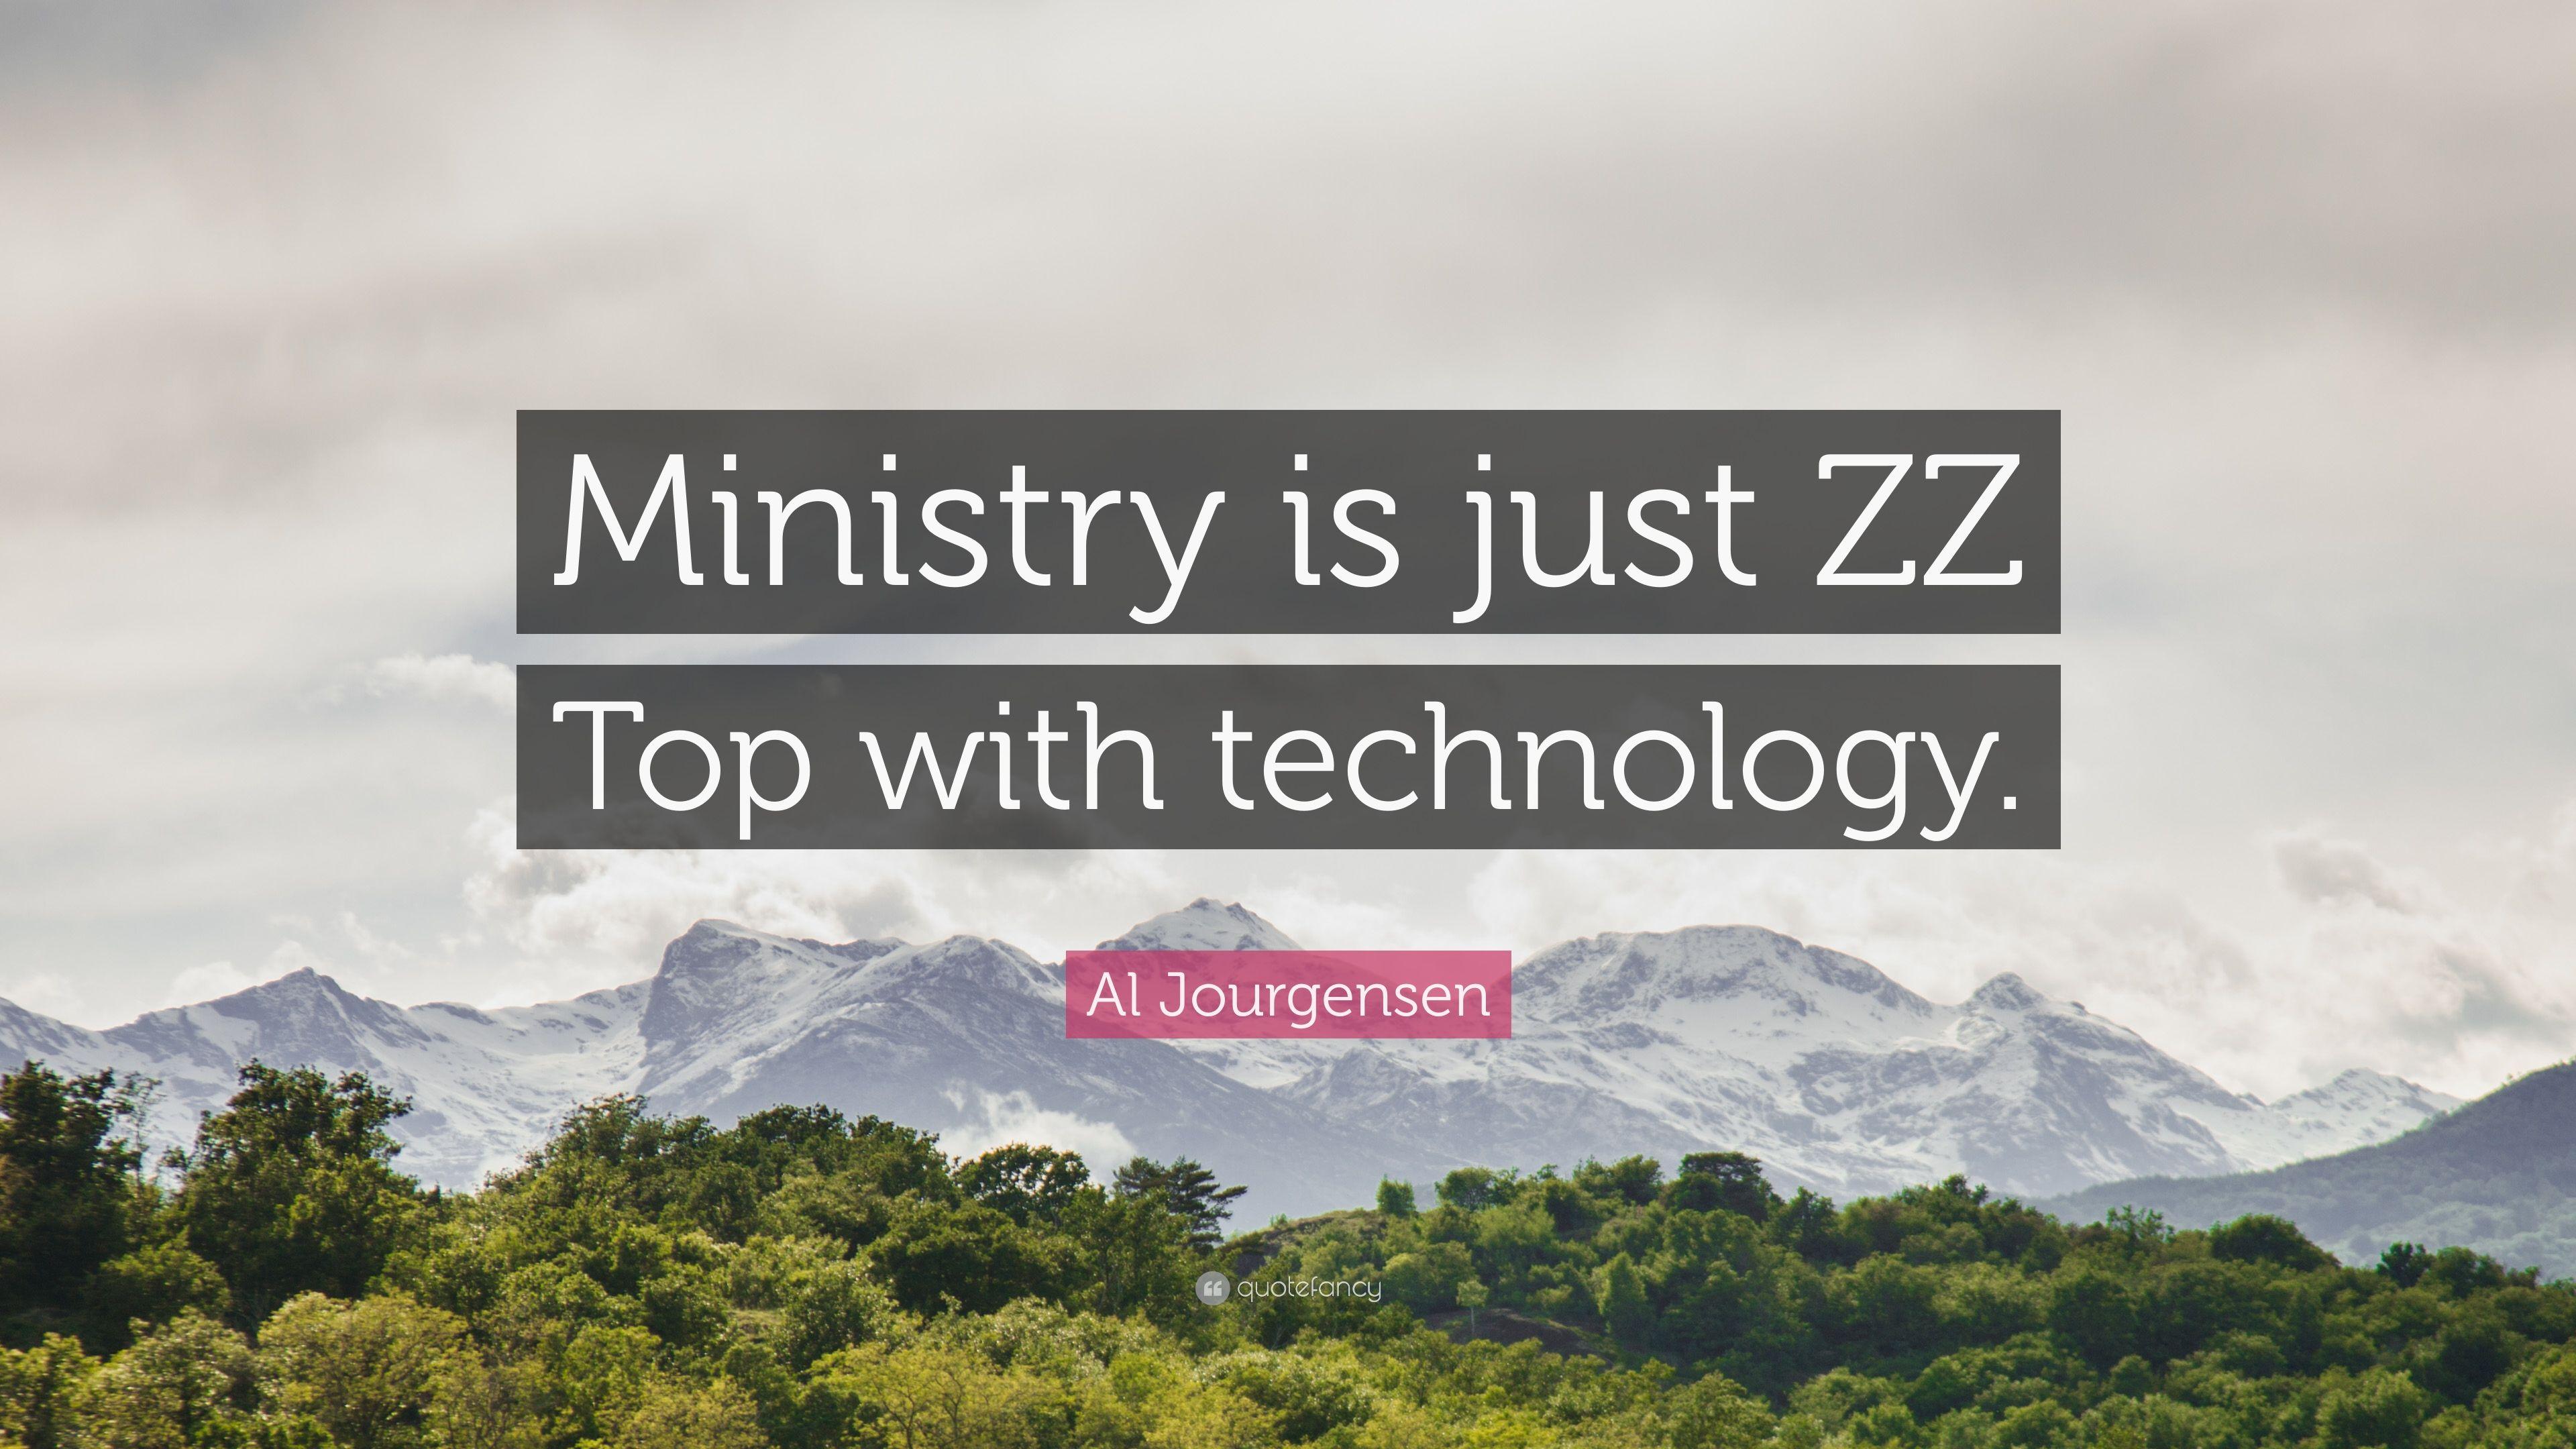 Al Jourgensen Quote: “Ministry is just ZZ Top with technology.” 7